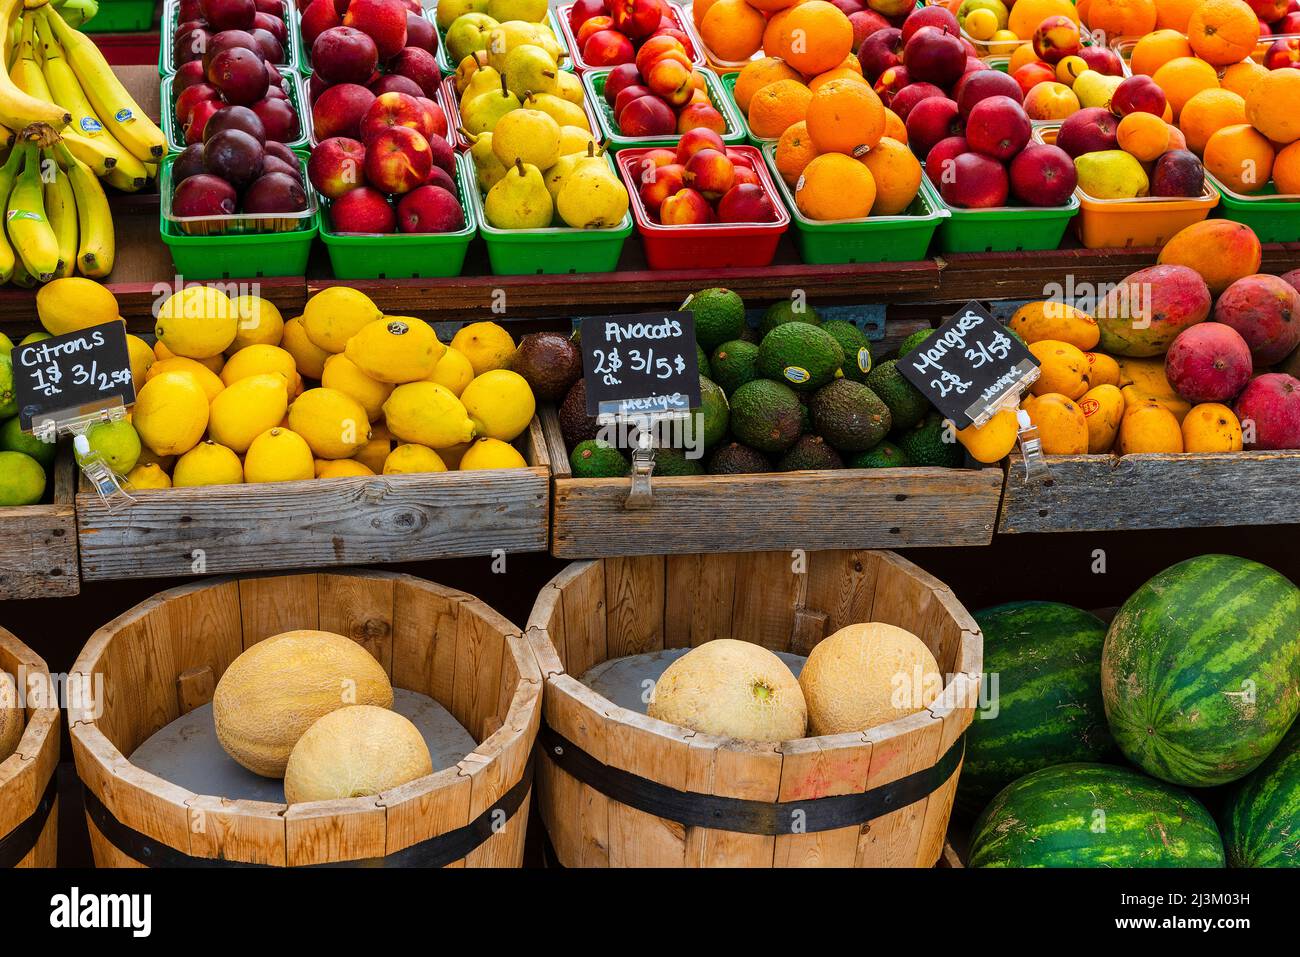 Fresh produce in a colourful display for sale at a supermarket with labels and prices in the French language; Montreal, Quebec, Canada Stock Photo